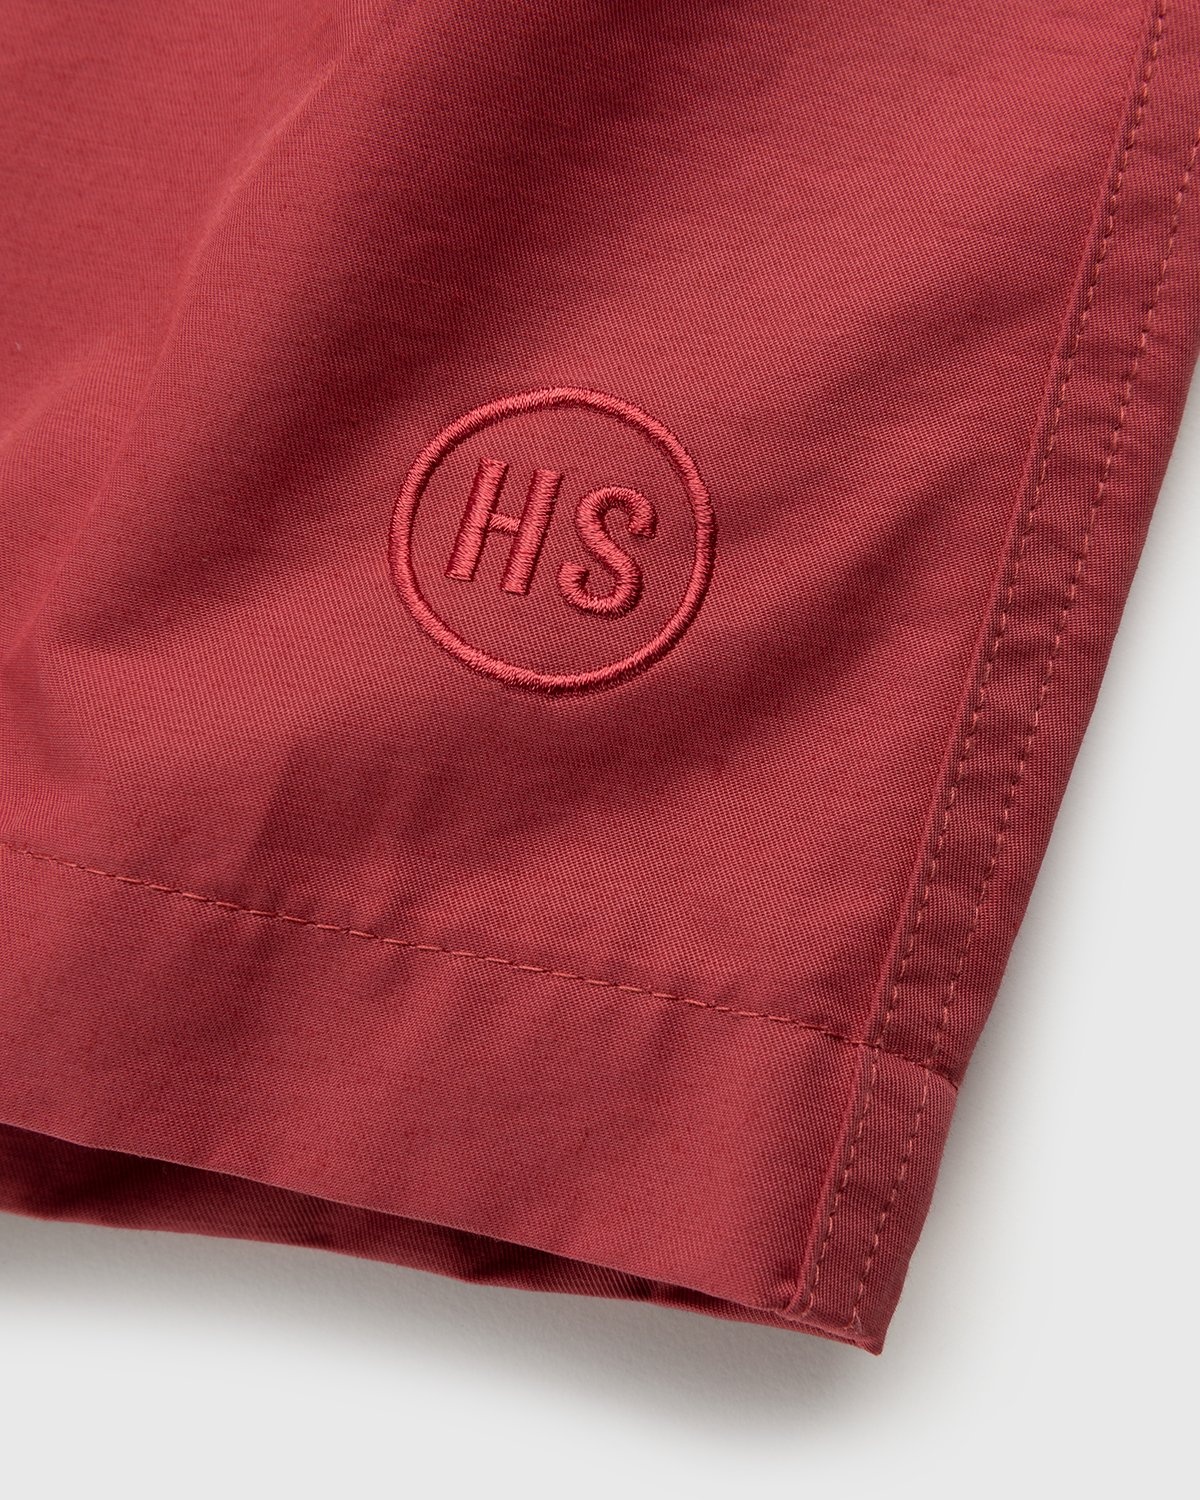 Highsnobiety – Cotton Nylon Water Short Red - Active Shorts - Pink - Image 6